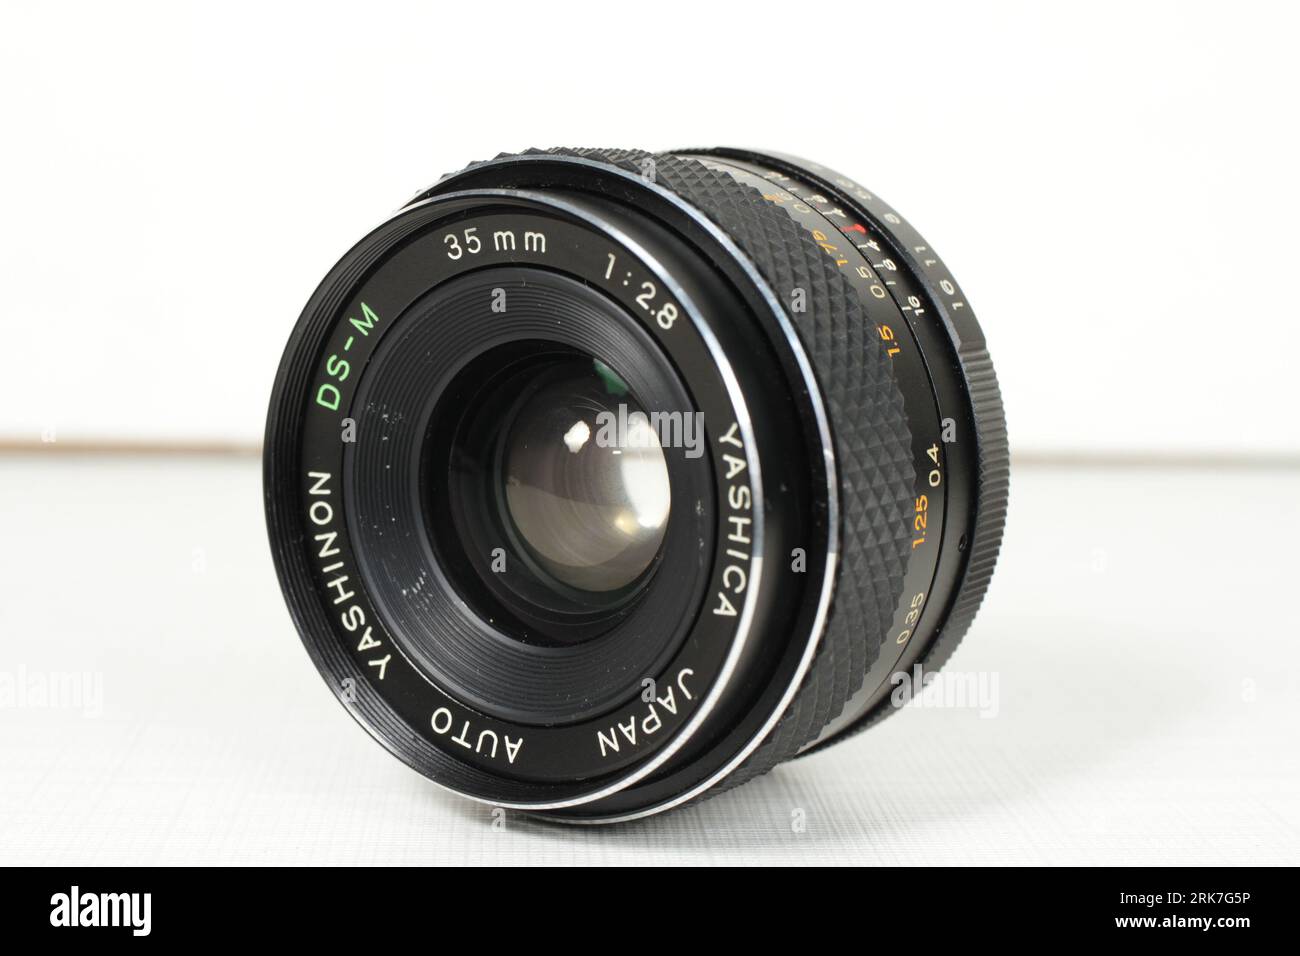 The Yashica 50mm prime lens from the 70s Stock Photo